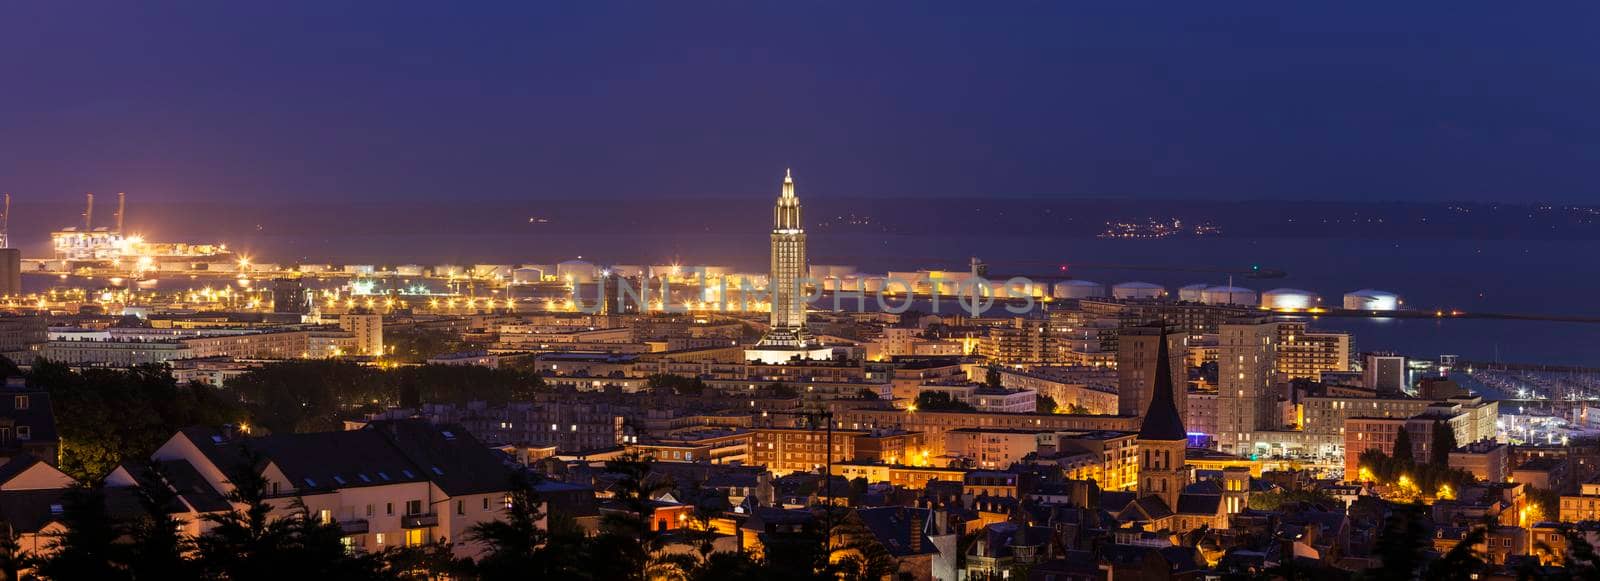 Panorama of Le Havre by benkrut